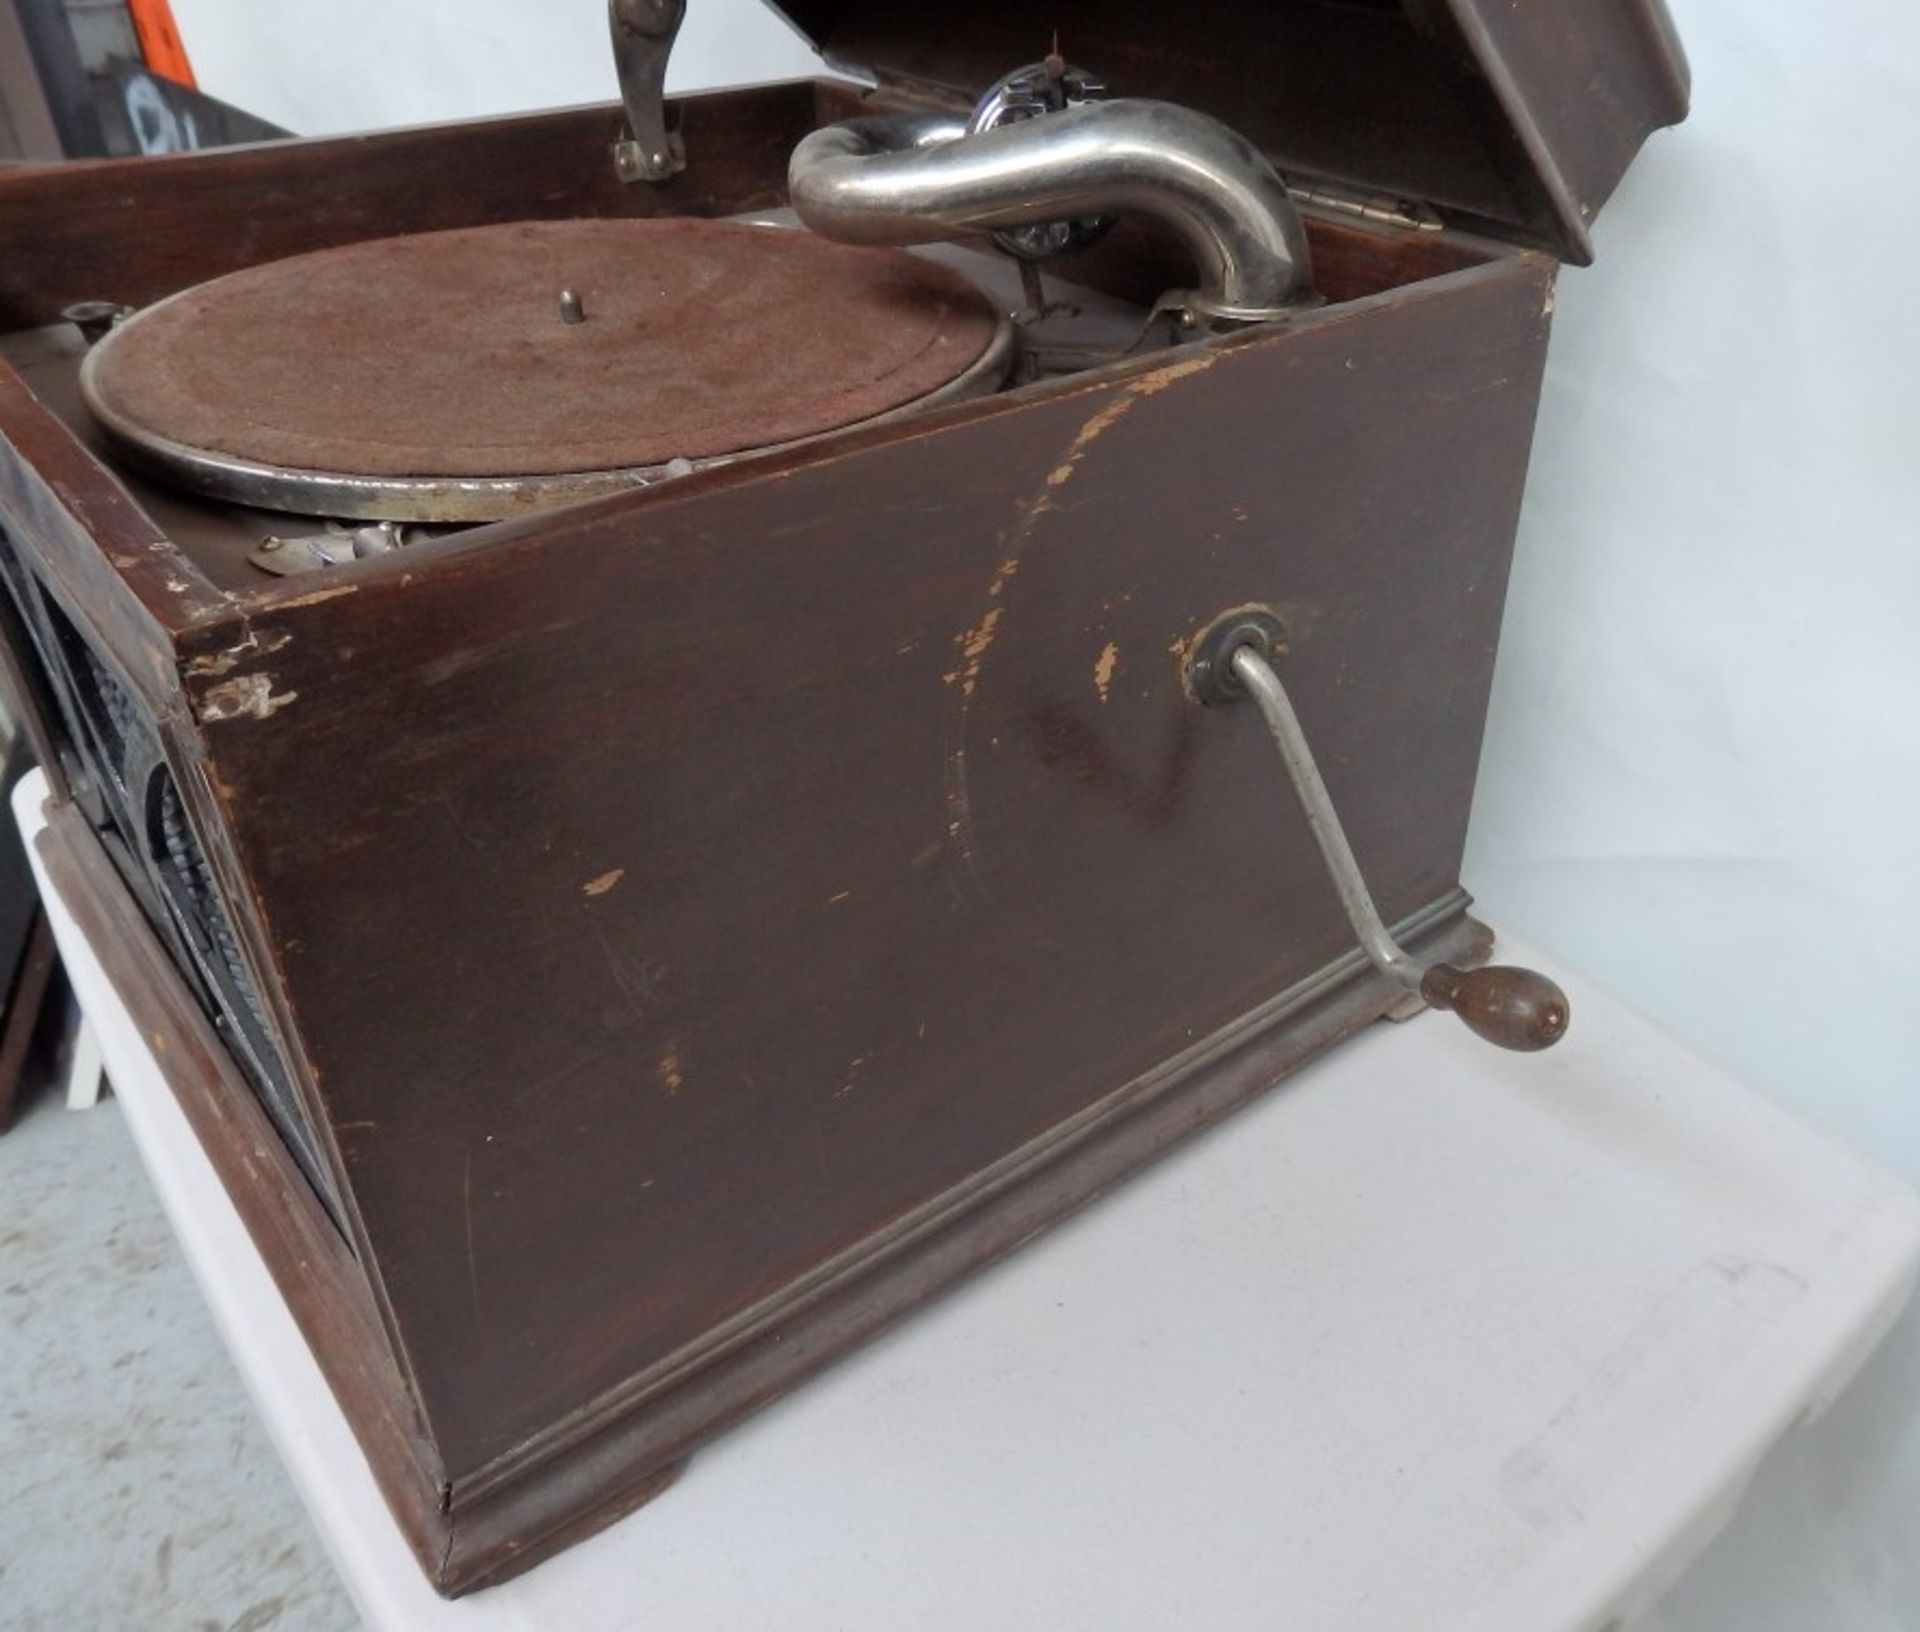 1 x Antique Victor Victrola "Talking Machine" Cabinet Gramophone (Circa 1917) - Crank Operated - - Image 3 of 6